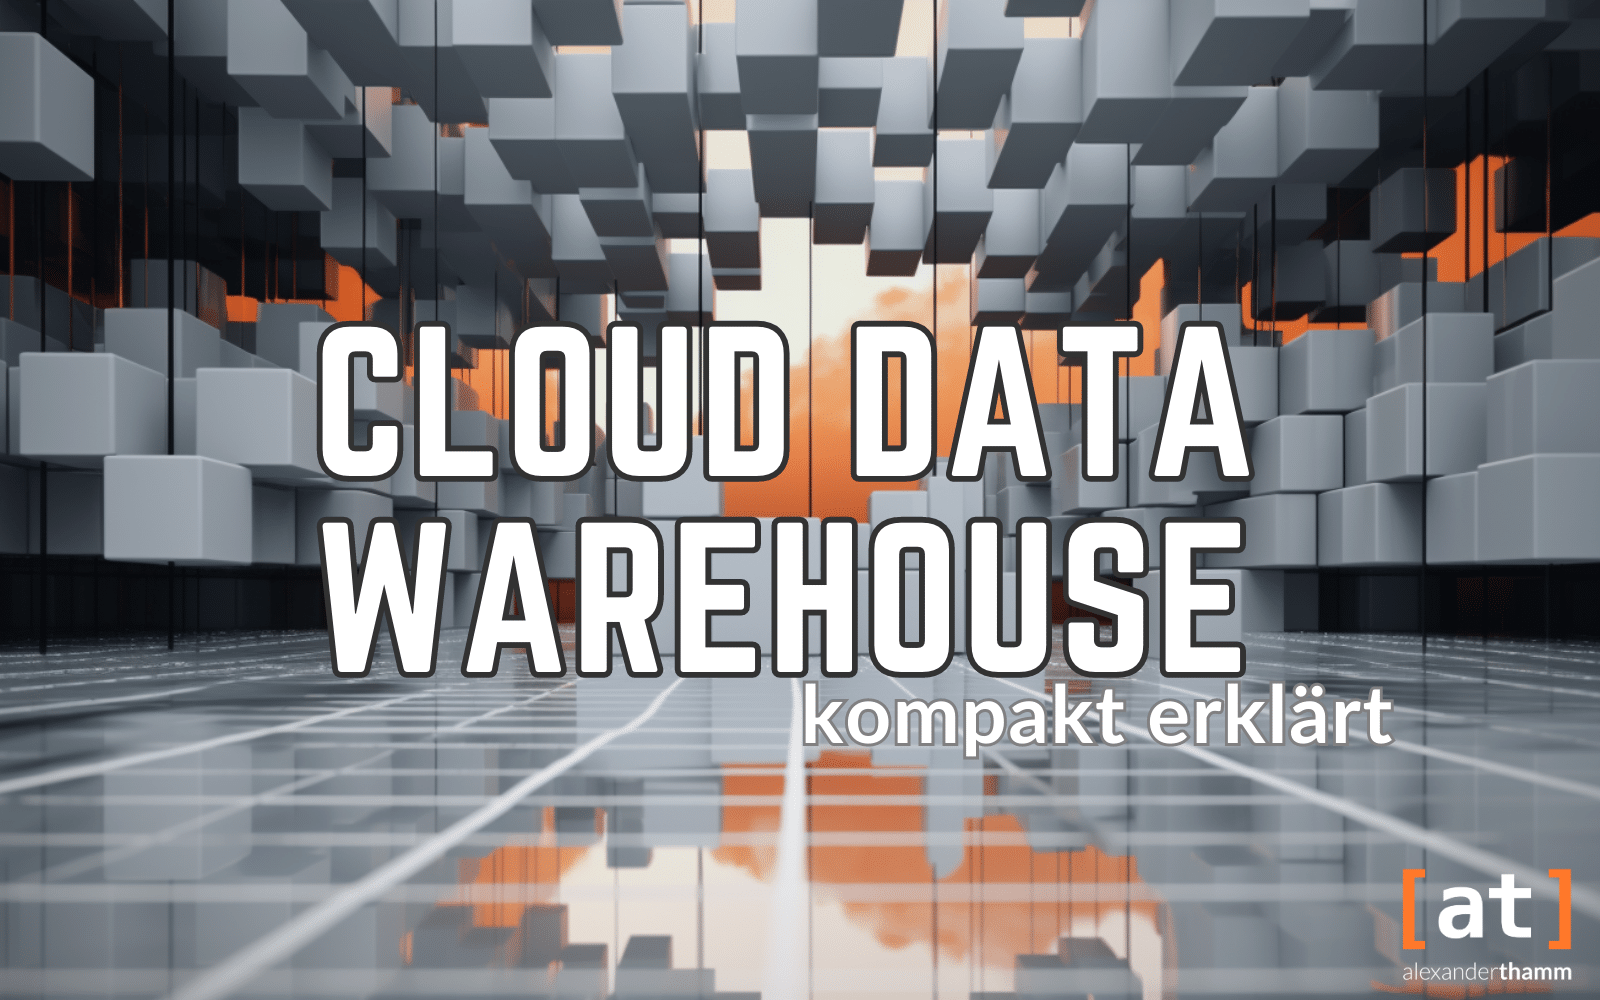 Cloud Data Warehouse: compactly explained, an architectural construction of grey blocks with an orange cloud in the background and a reflecting glass surface as floor in the foreground